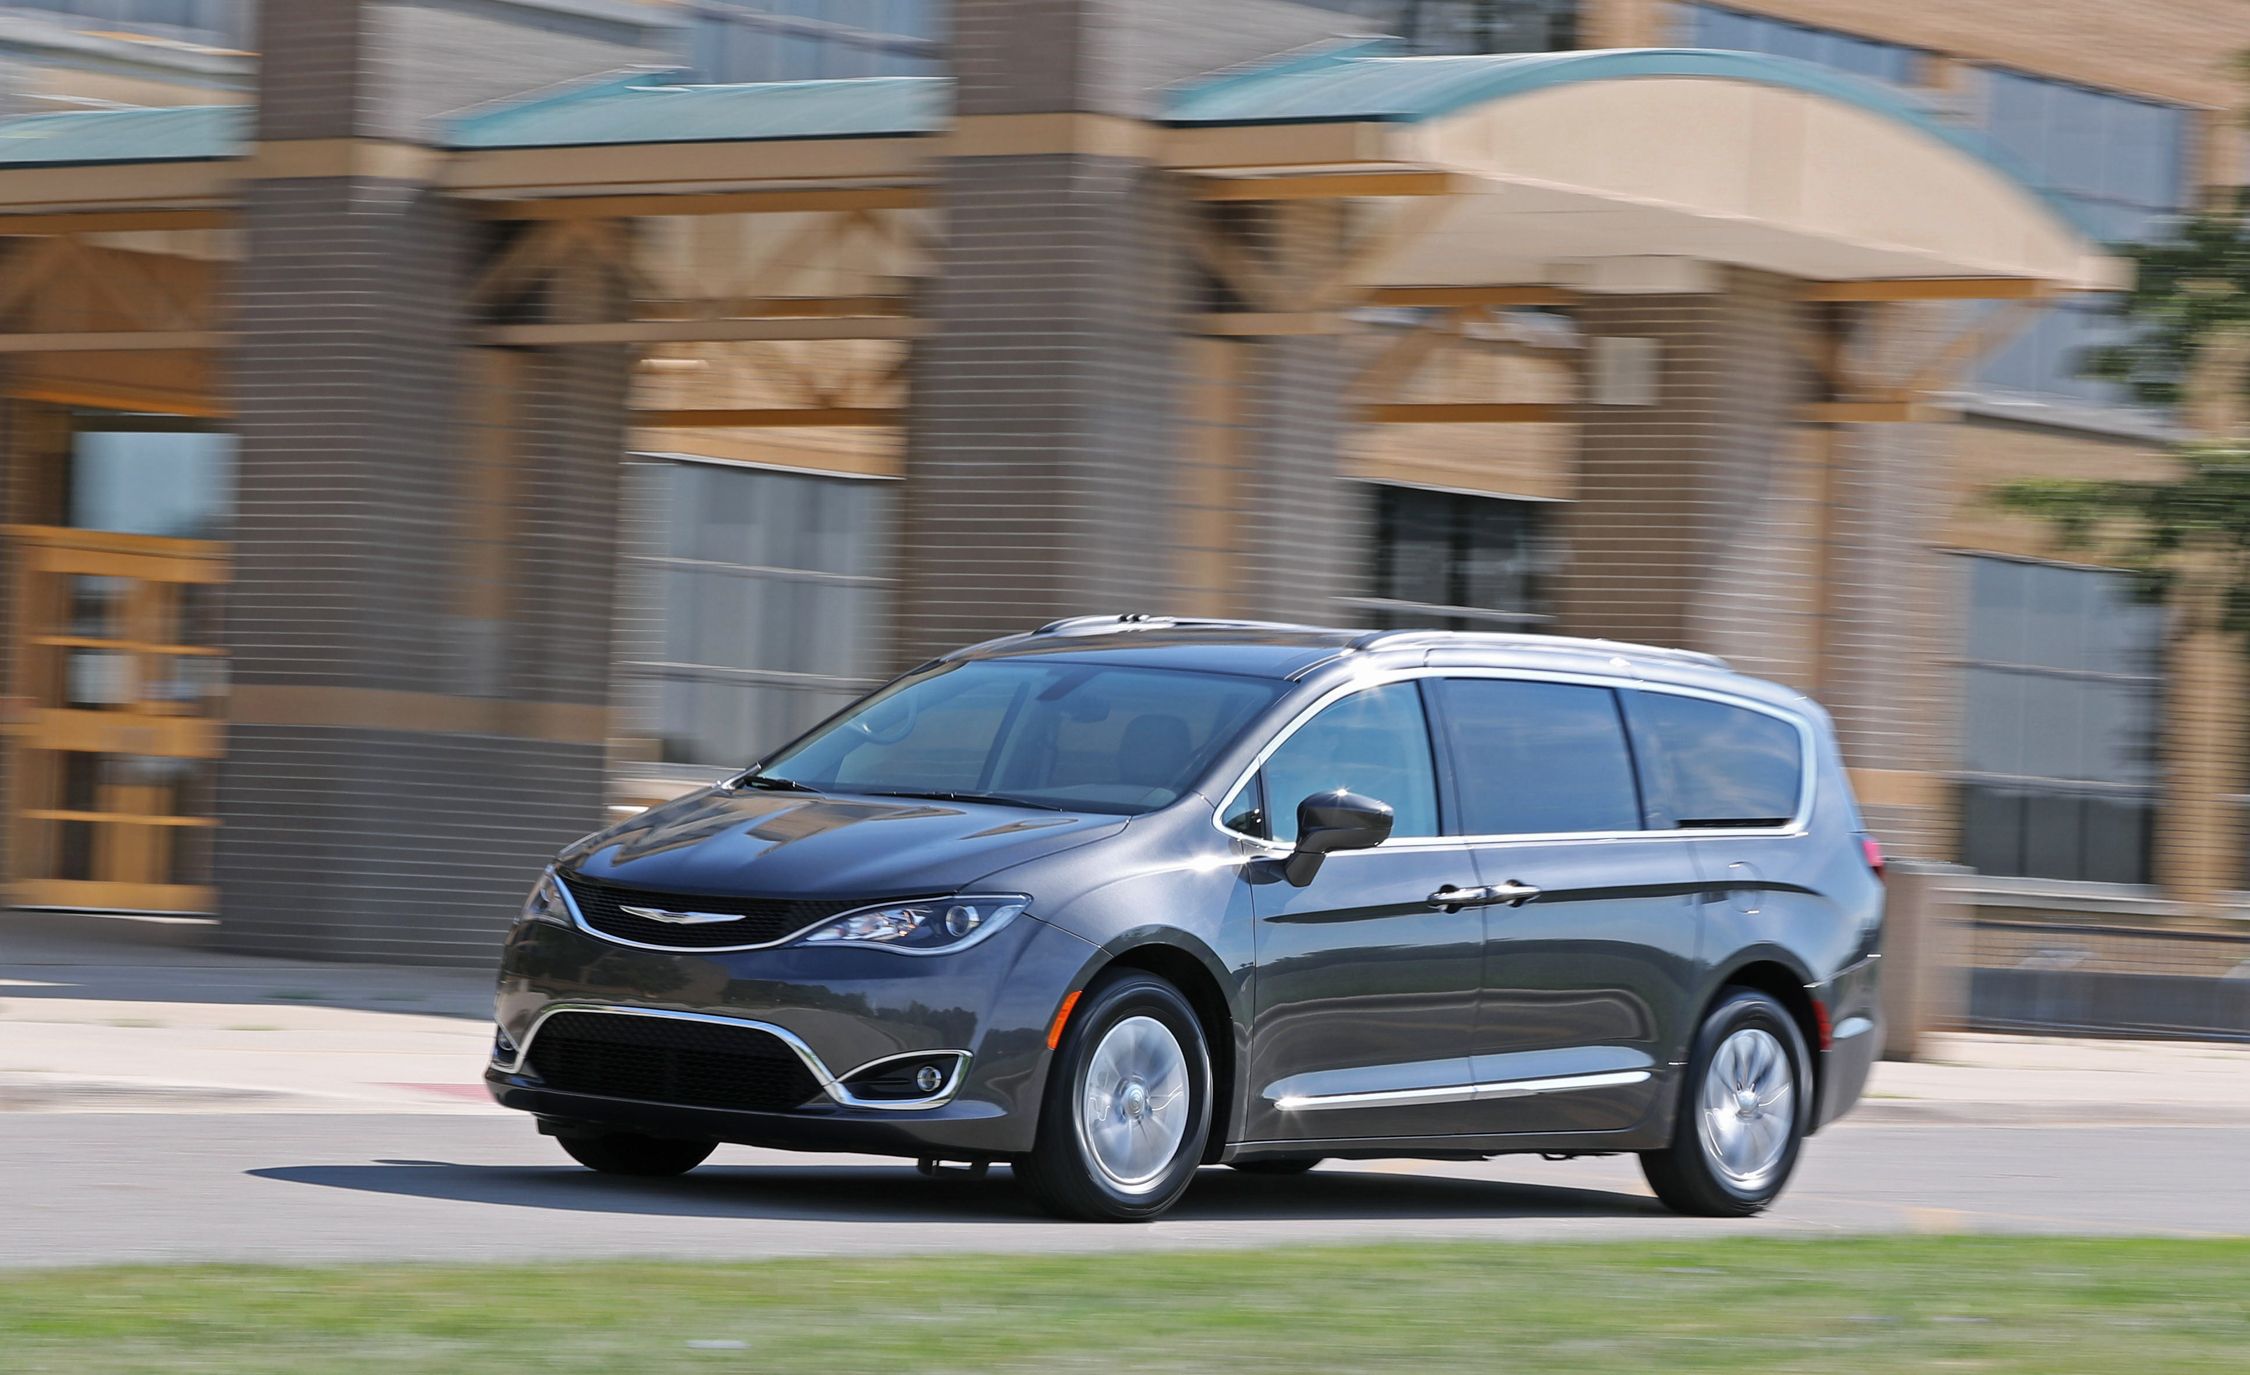 2017 Chrysler Pacifica Test Drive (View 19 of 25)